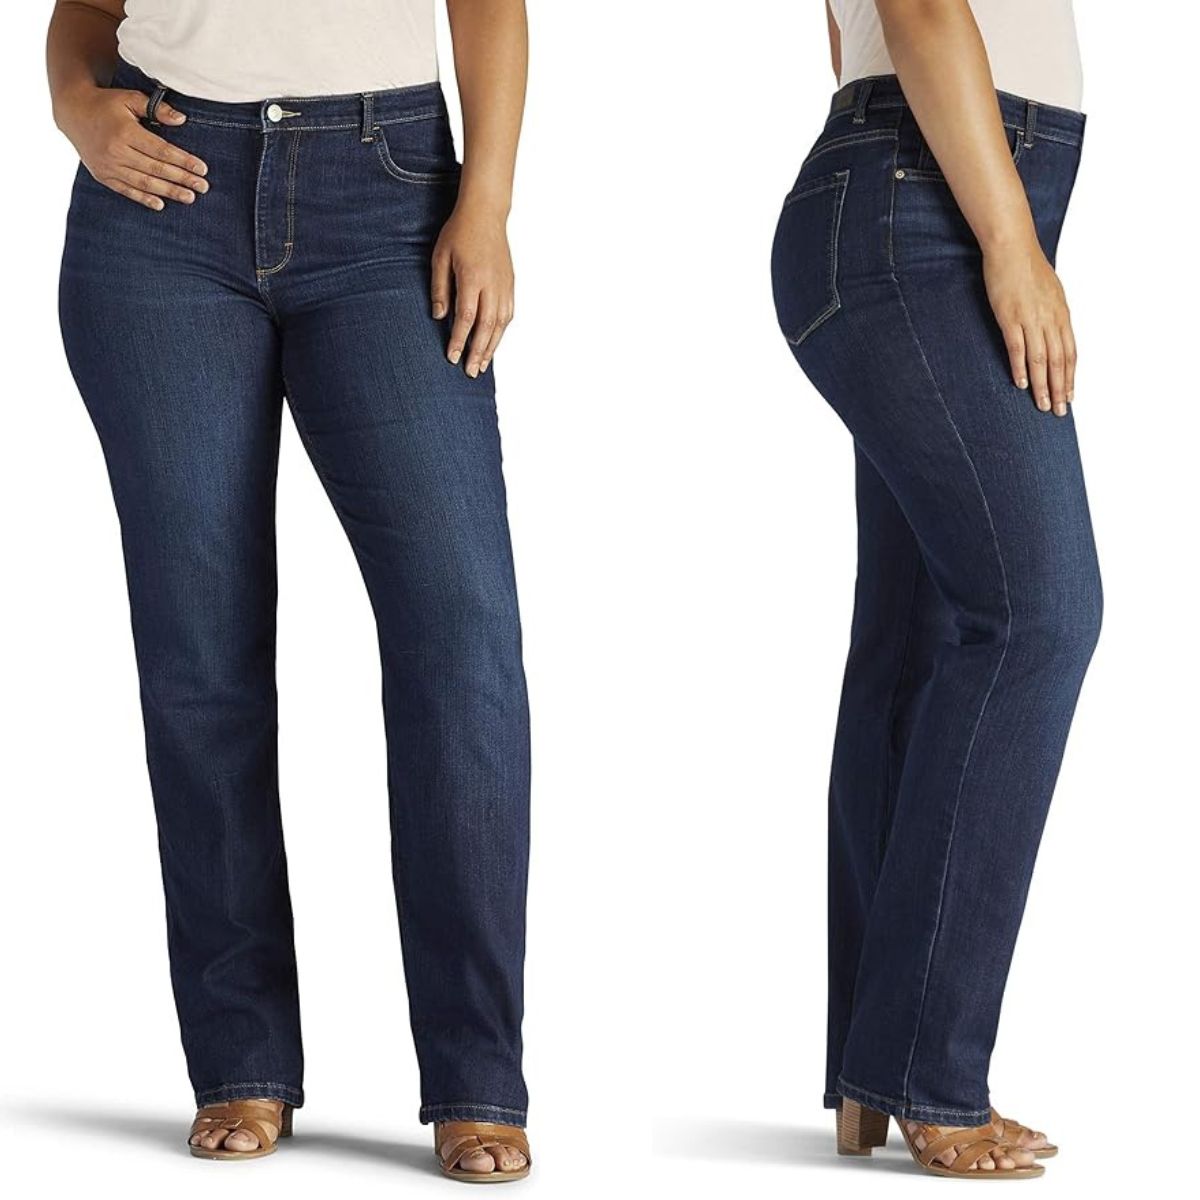 Women's Flared Jeans » Shop Online Now – FITJEANS